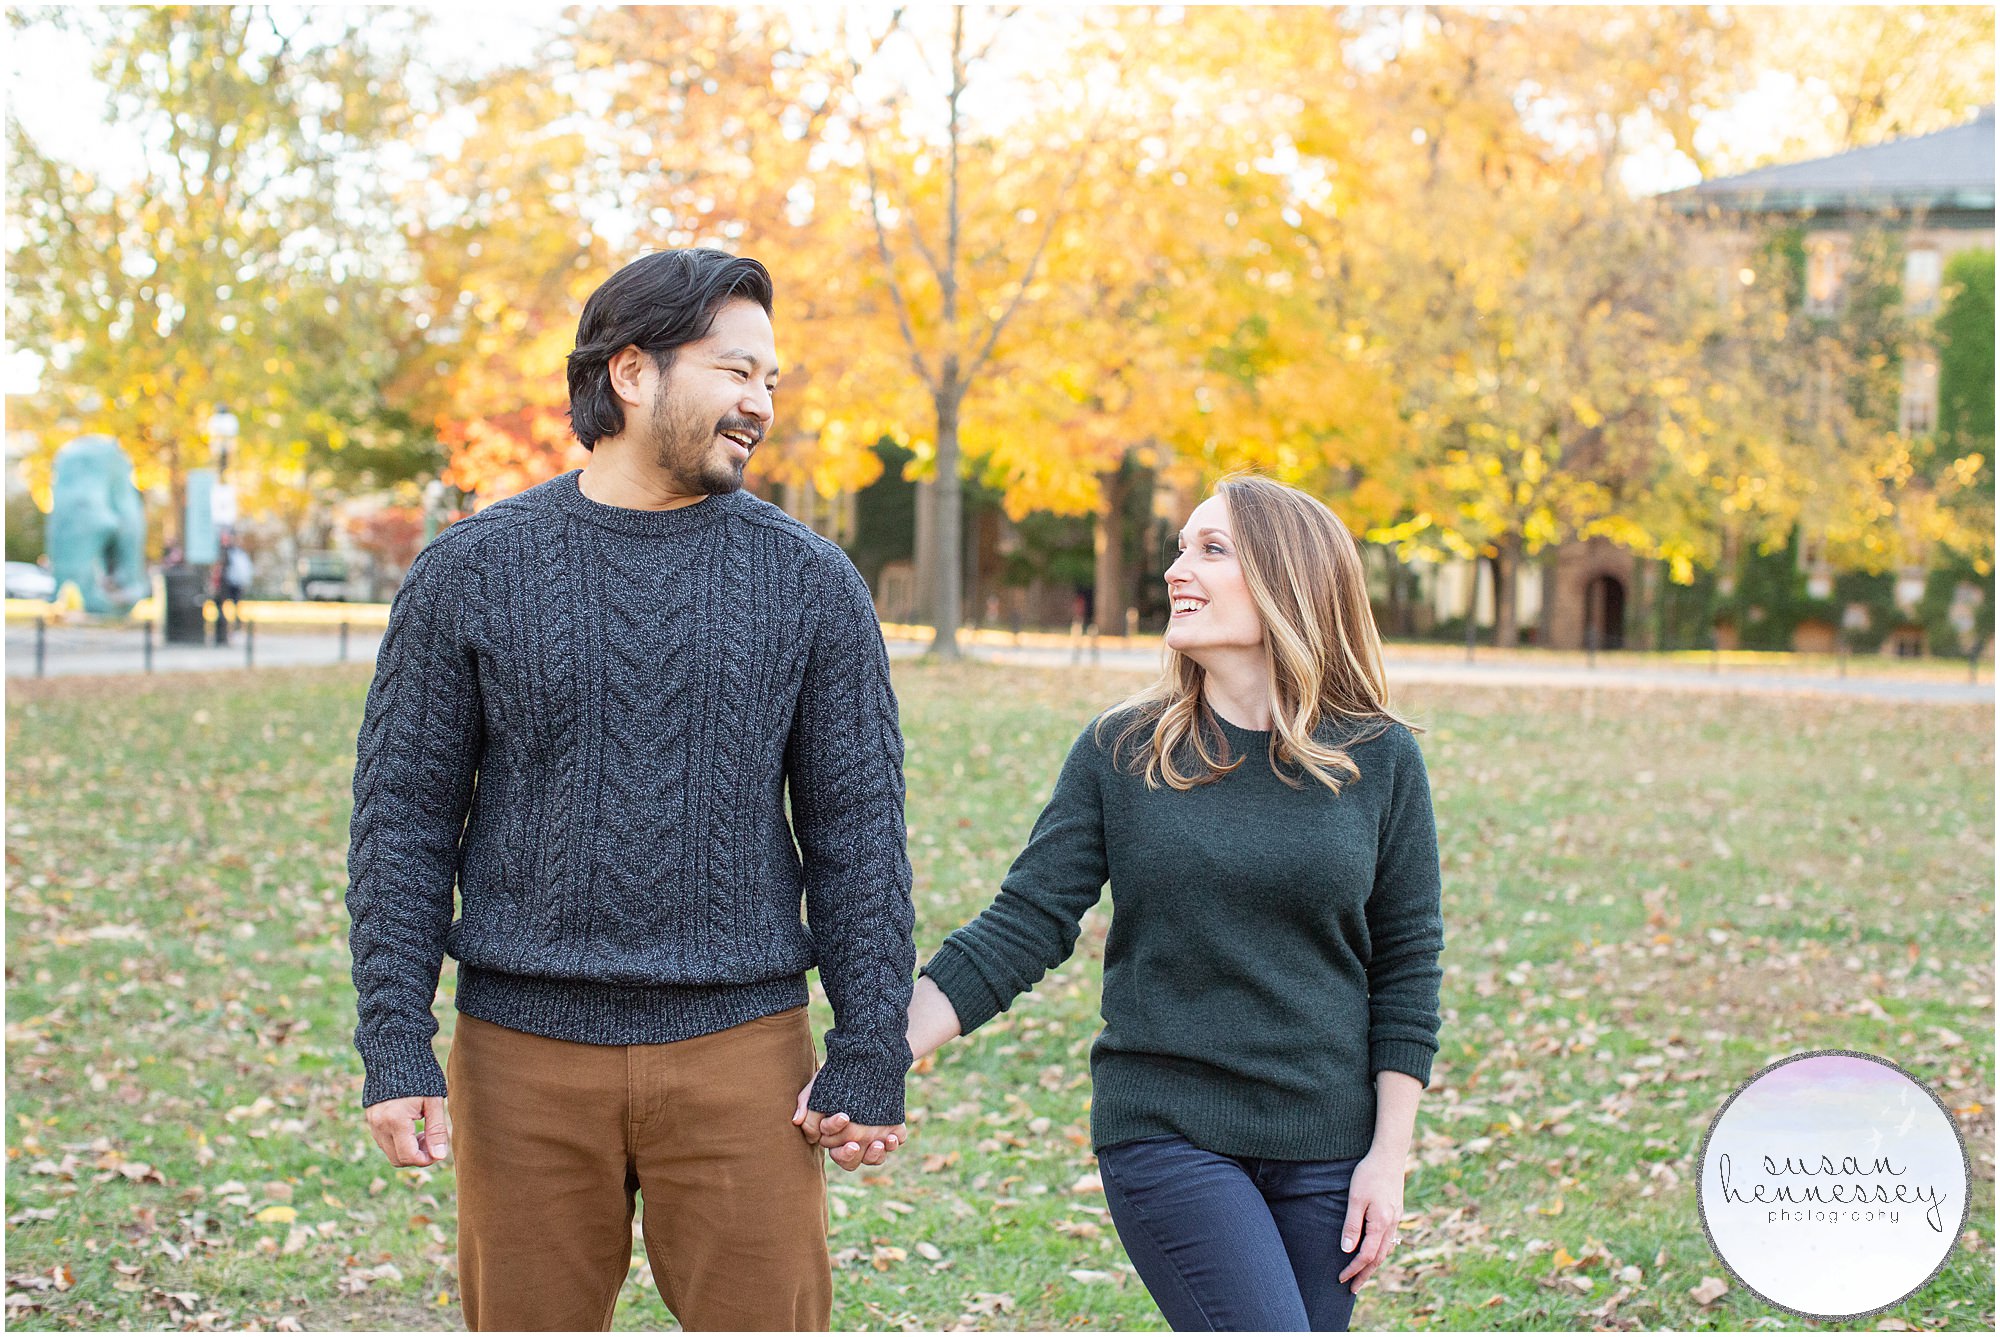 A Fall engagement session at Princeton University